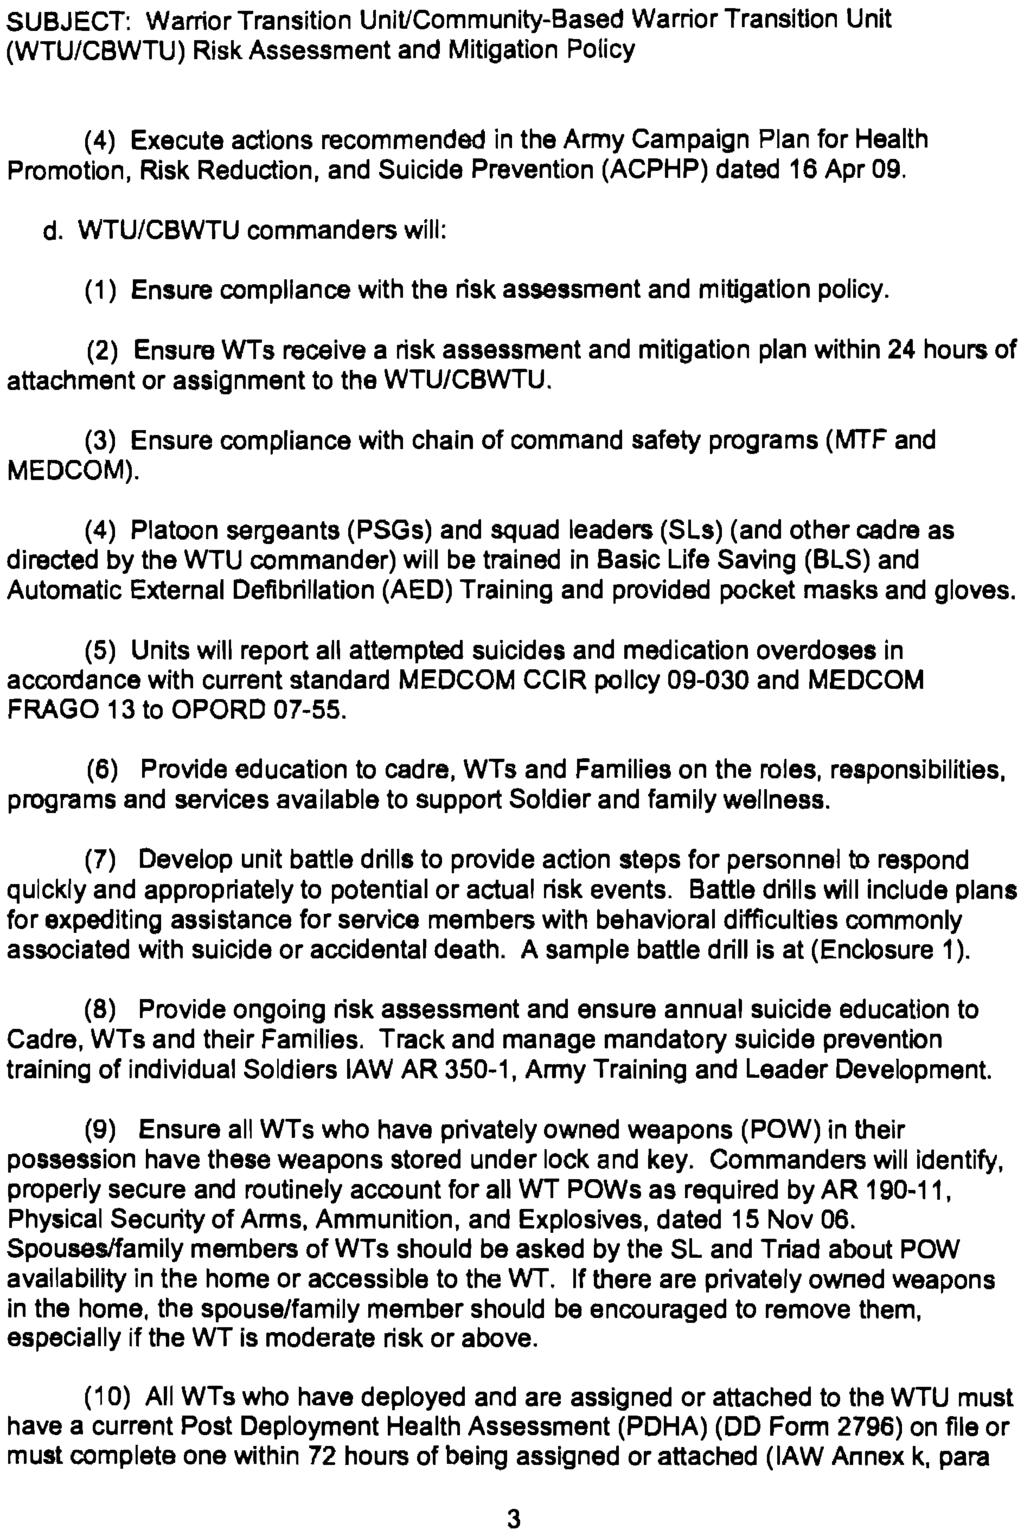 SUBJECT: Warrior Transition Unit/Community-Based Warrior Transition Unit (WTU/CBWTU) Risk Assessment and Mitigation Policy (4) Execute actions recommended in the Army Campaign Plan for Health